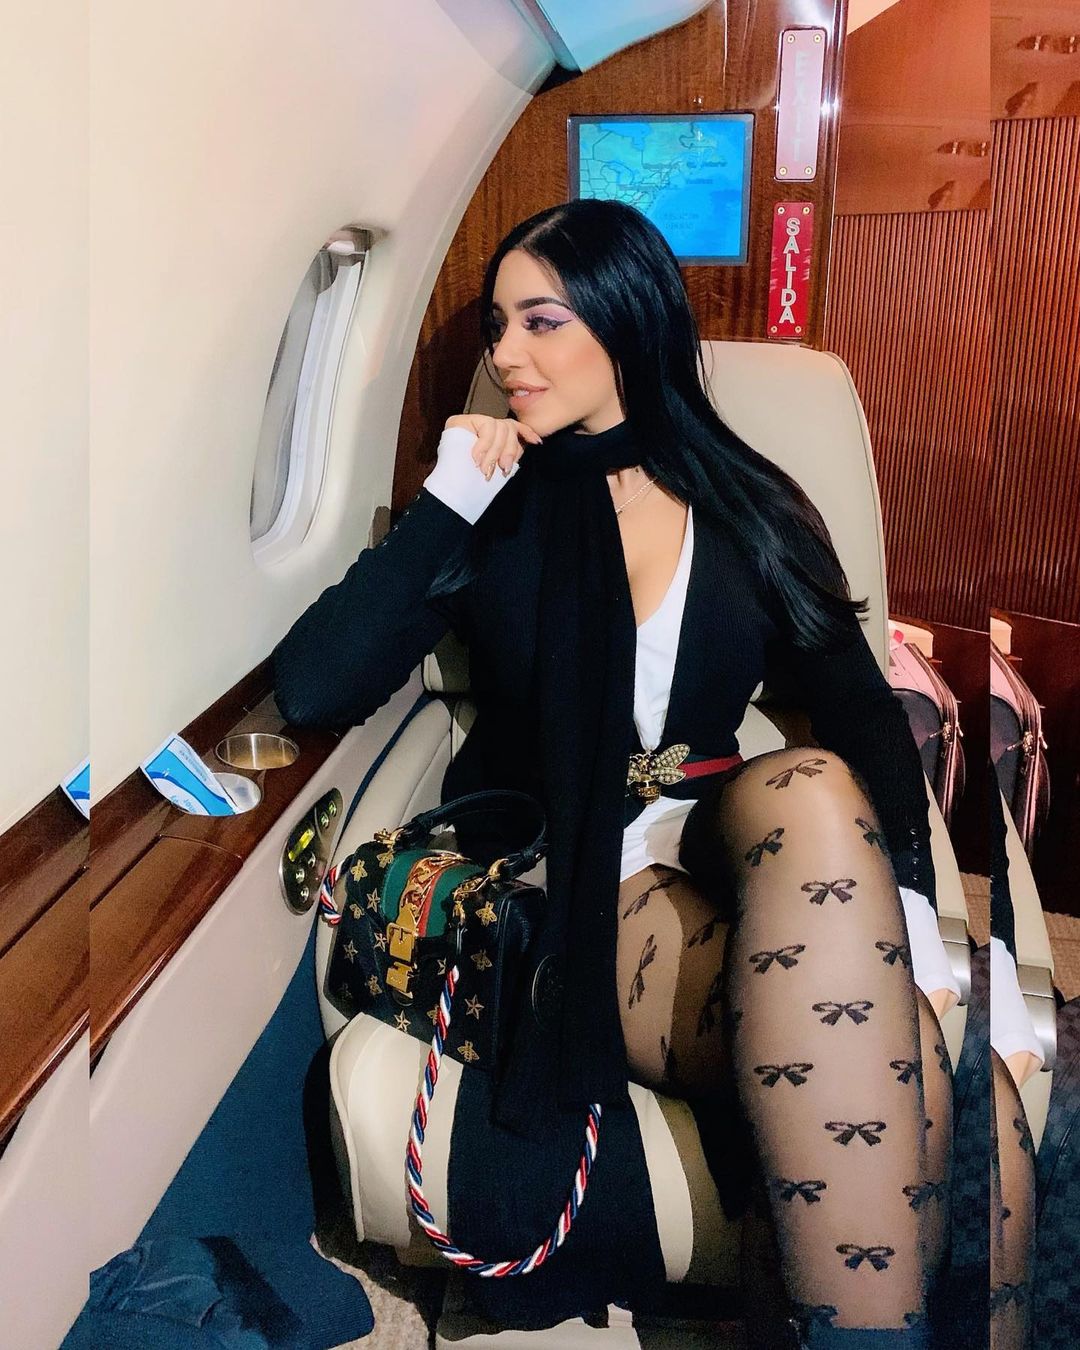 She is often spotted wearing high-end designers like Gucci and flying on private jets